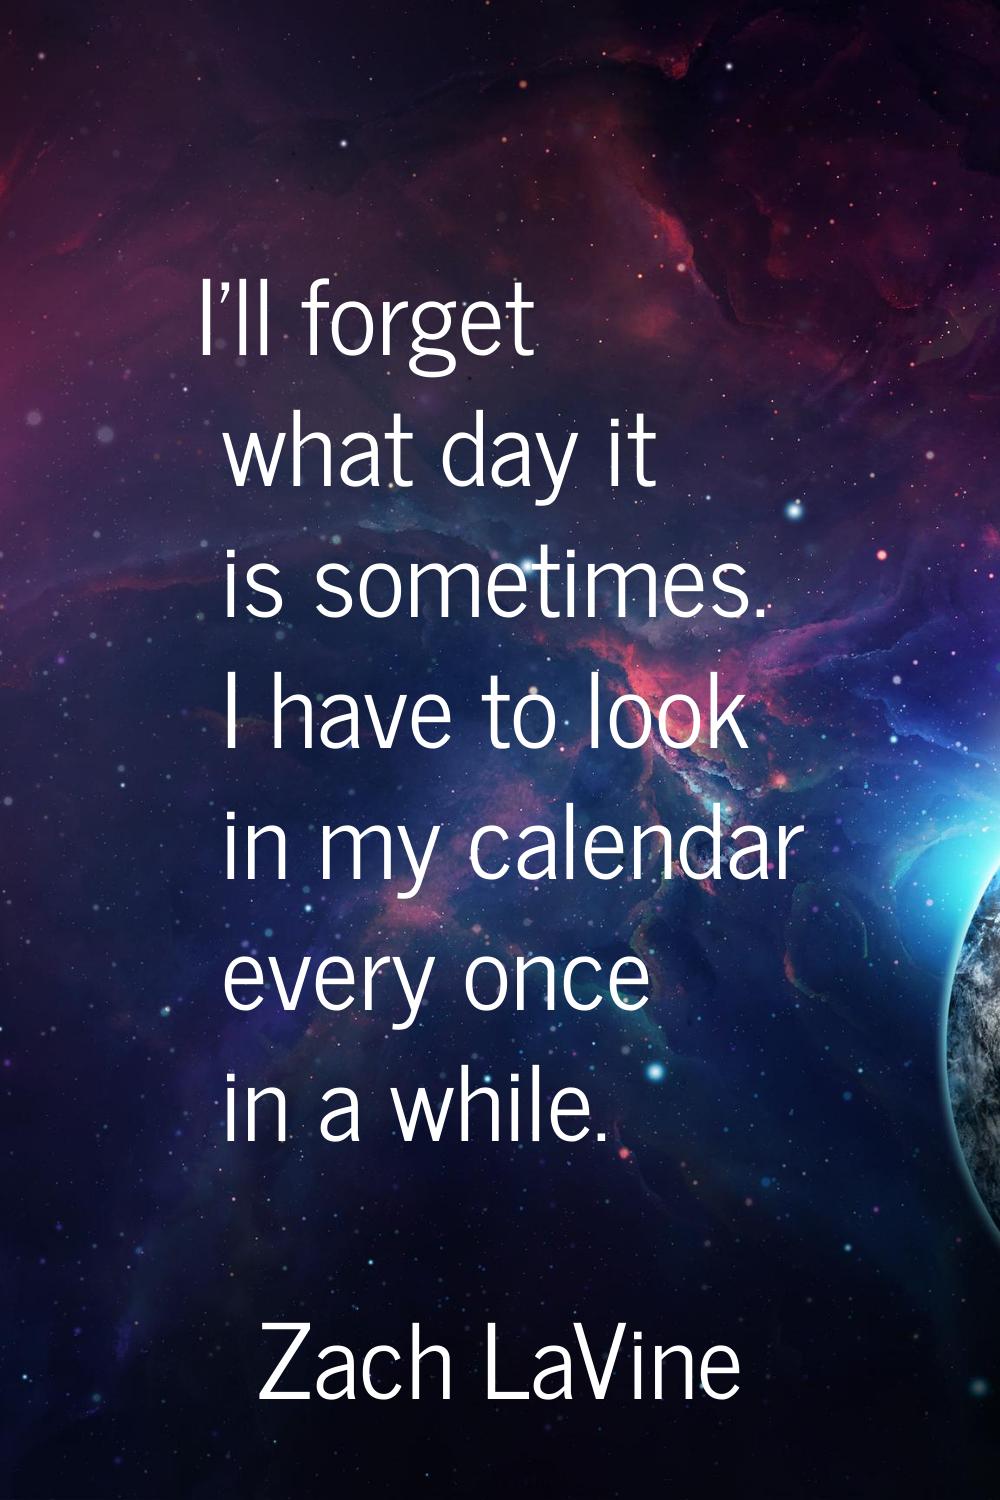 I'll forget what day it is sometimes. I have to look in my calendar every once in a while.